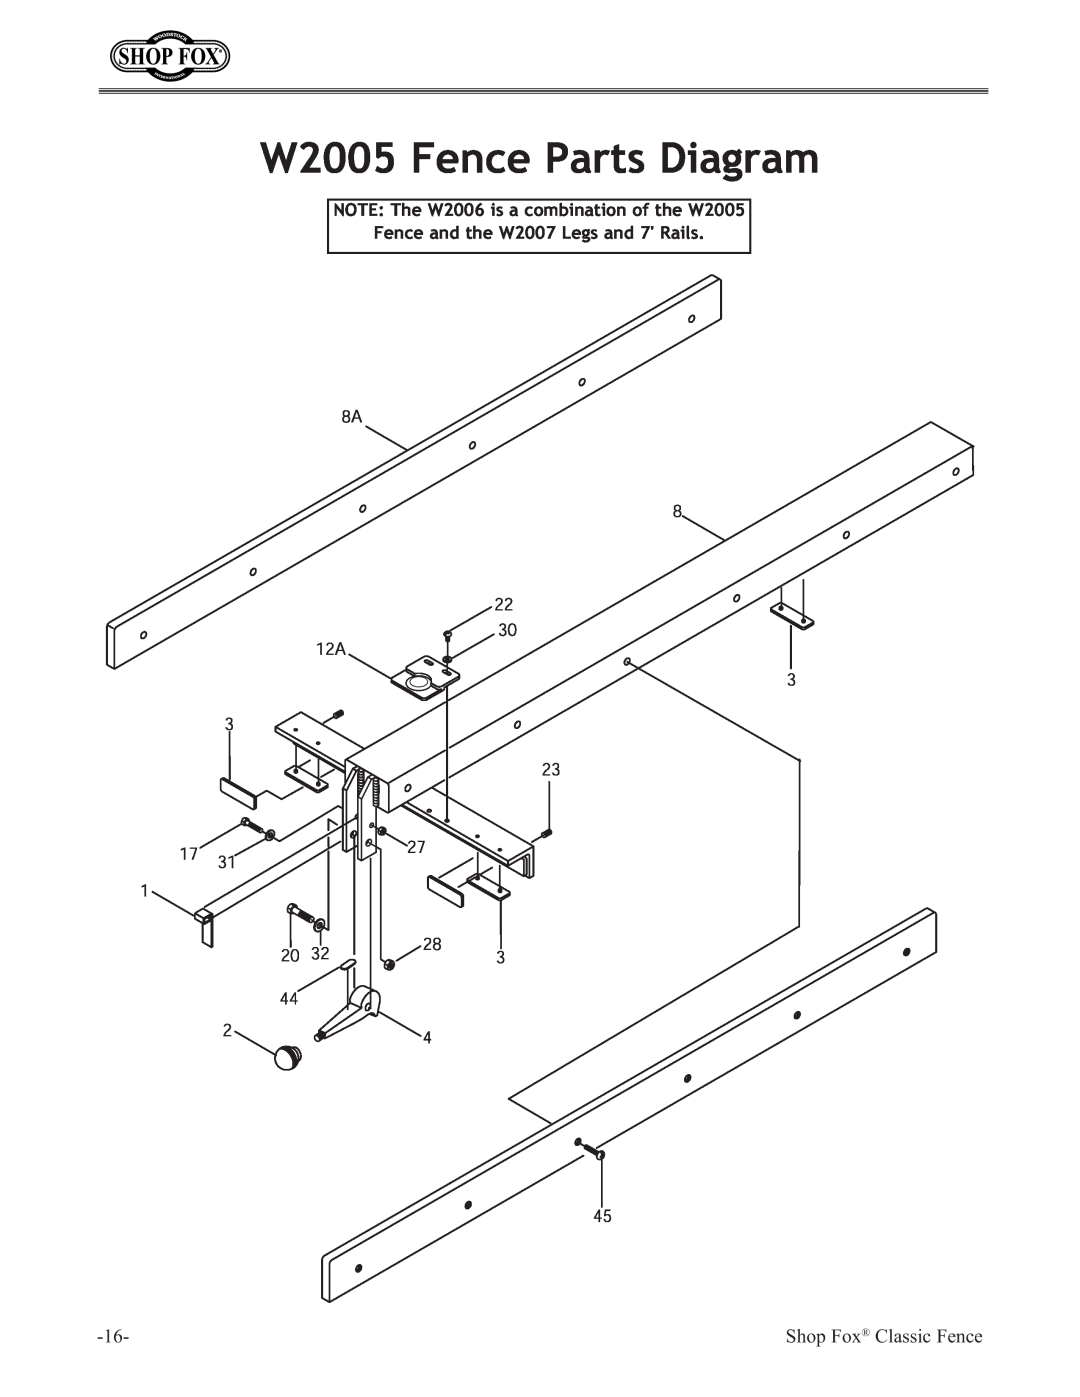 Woodstock W2007 W2005 Fence Parts Diagram, Shop Fox Classic Fence, NOTE The W2006 is a combination of the W2005 